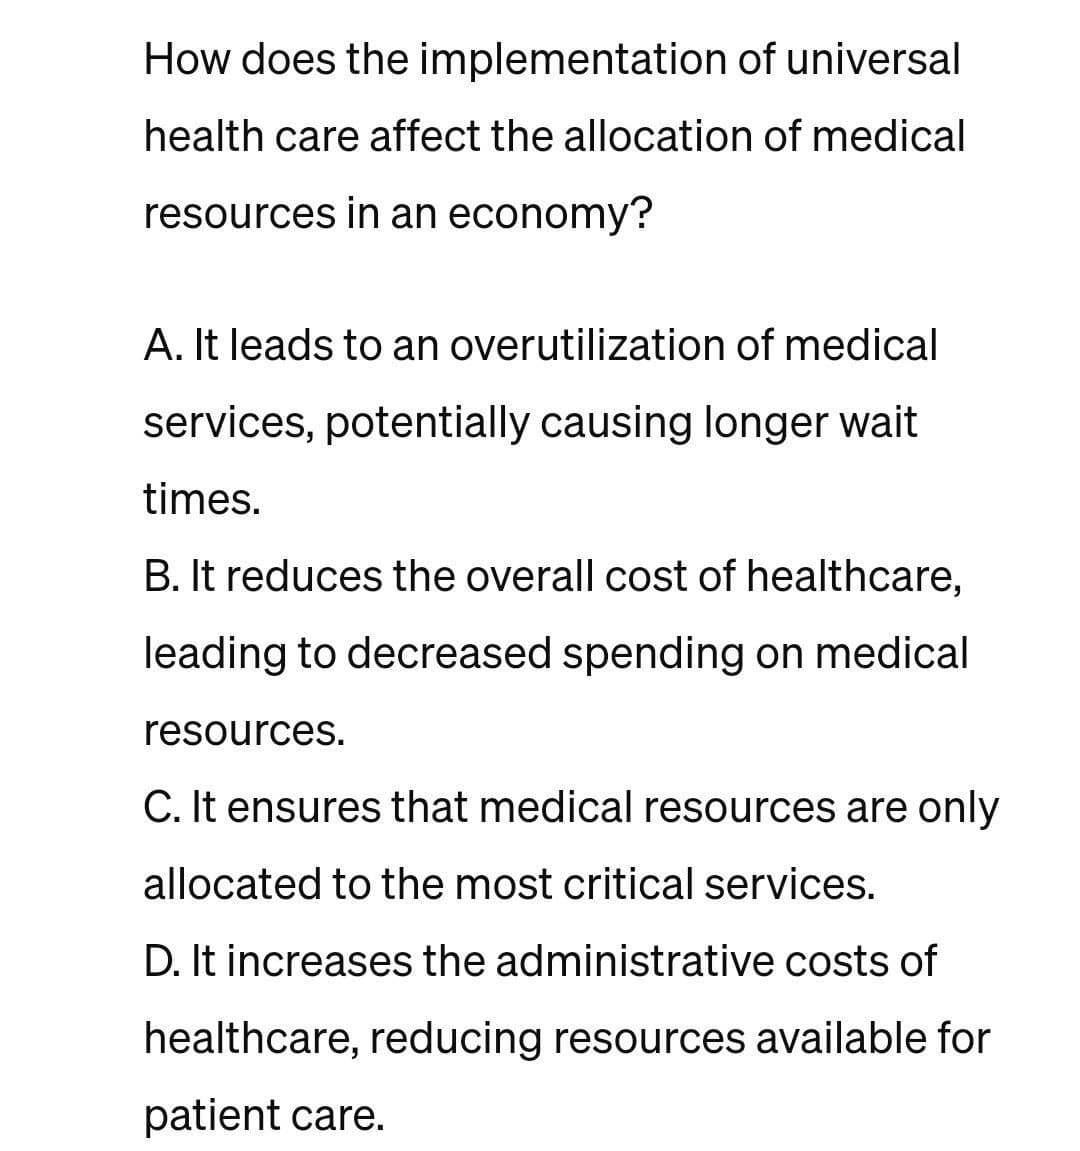 How does the implementation of universal
health care affect the allocation of medical
resources in an economy?
A. It leads to an overutilization of medical
services, potentially causing longer wait.
times.
B. It reduces the overall cost of healthcare,
leading to decreased spending on medical
resources.
C. It ensures that medical resources are only
allocated to the most critical services.
D. It increases the administrative costs of
healthcare, reducing resources available for
patient care.